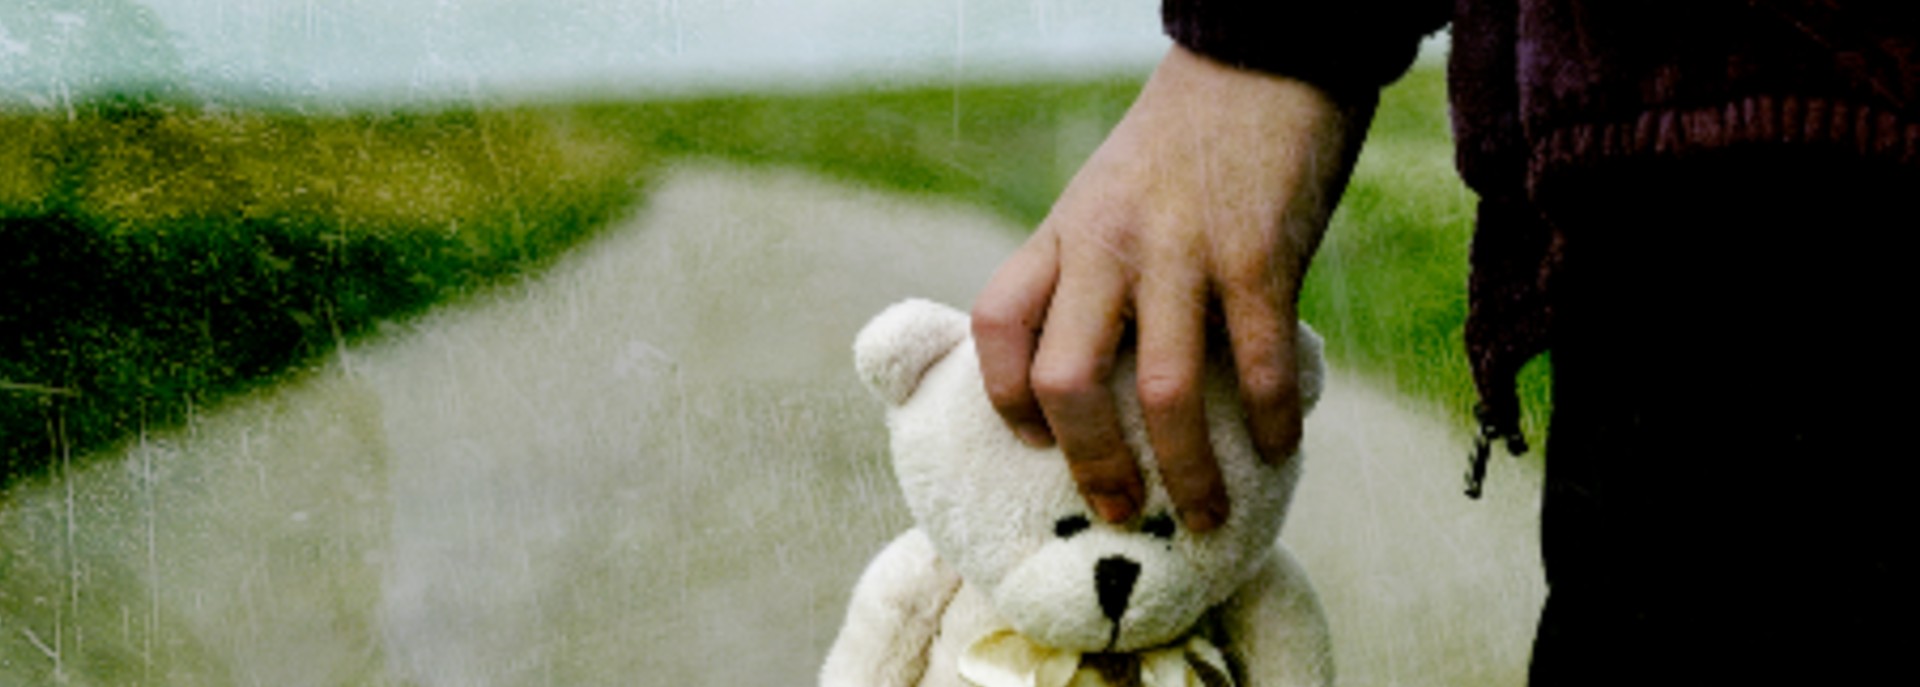 Child's hand holding a white teddy bear